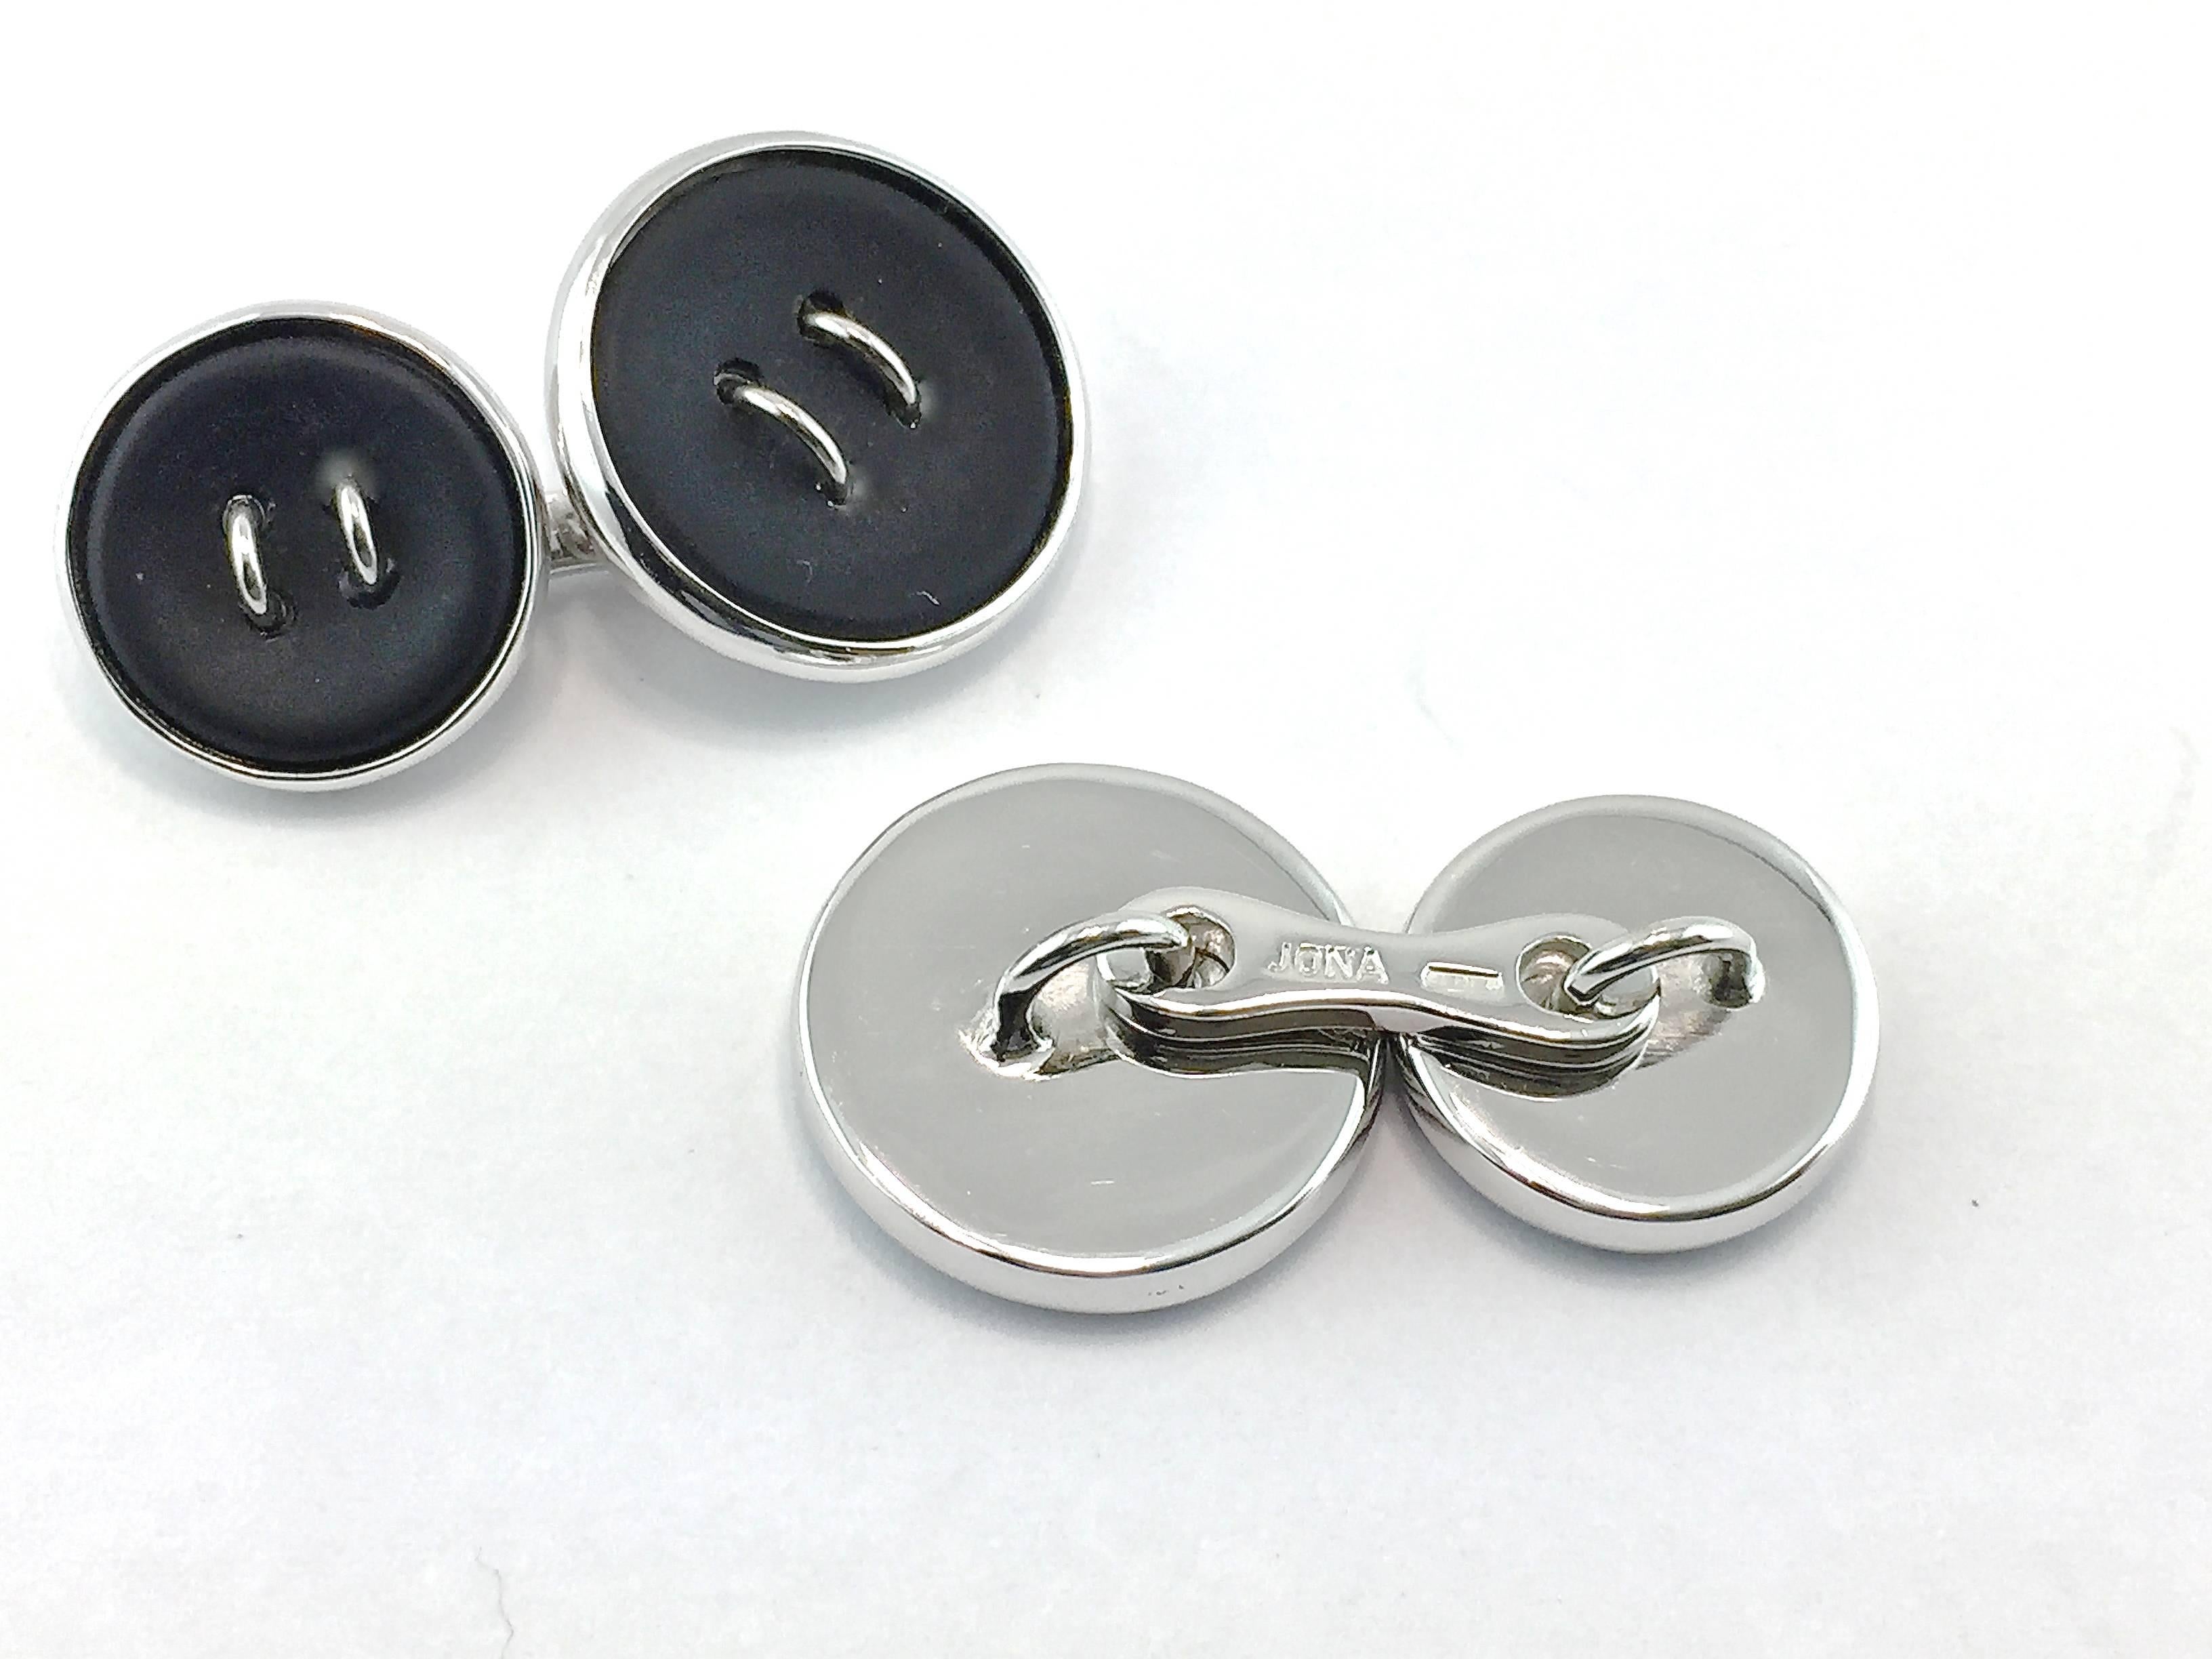 Jona design collection, hand crafted in Italy, sterling silver cufflinks with onyx buttons.
Bigger button diameter: 0.61 in. Smaller button diameter: 0.50 in.
All Jona jewelry is new and has never been previously owned or worn.